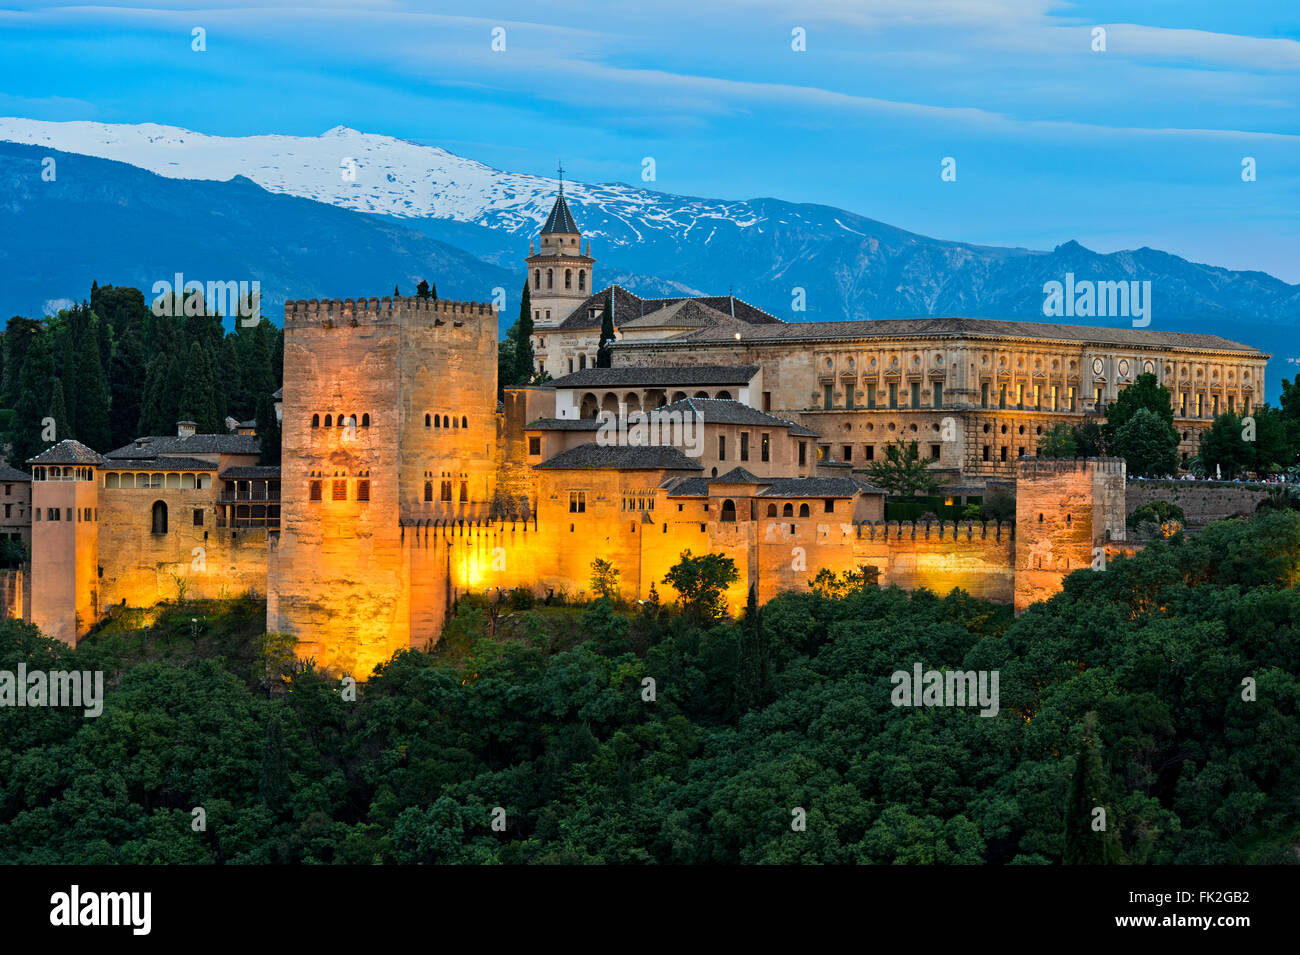 Evening light at the Alhambra, UNESCO World Heritage Site, against the Sierra Nevada mountain range, Granada, Andalusia, Spain Stock Photo